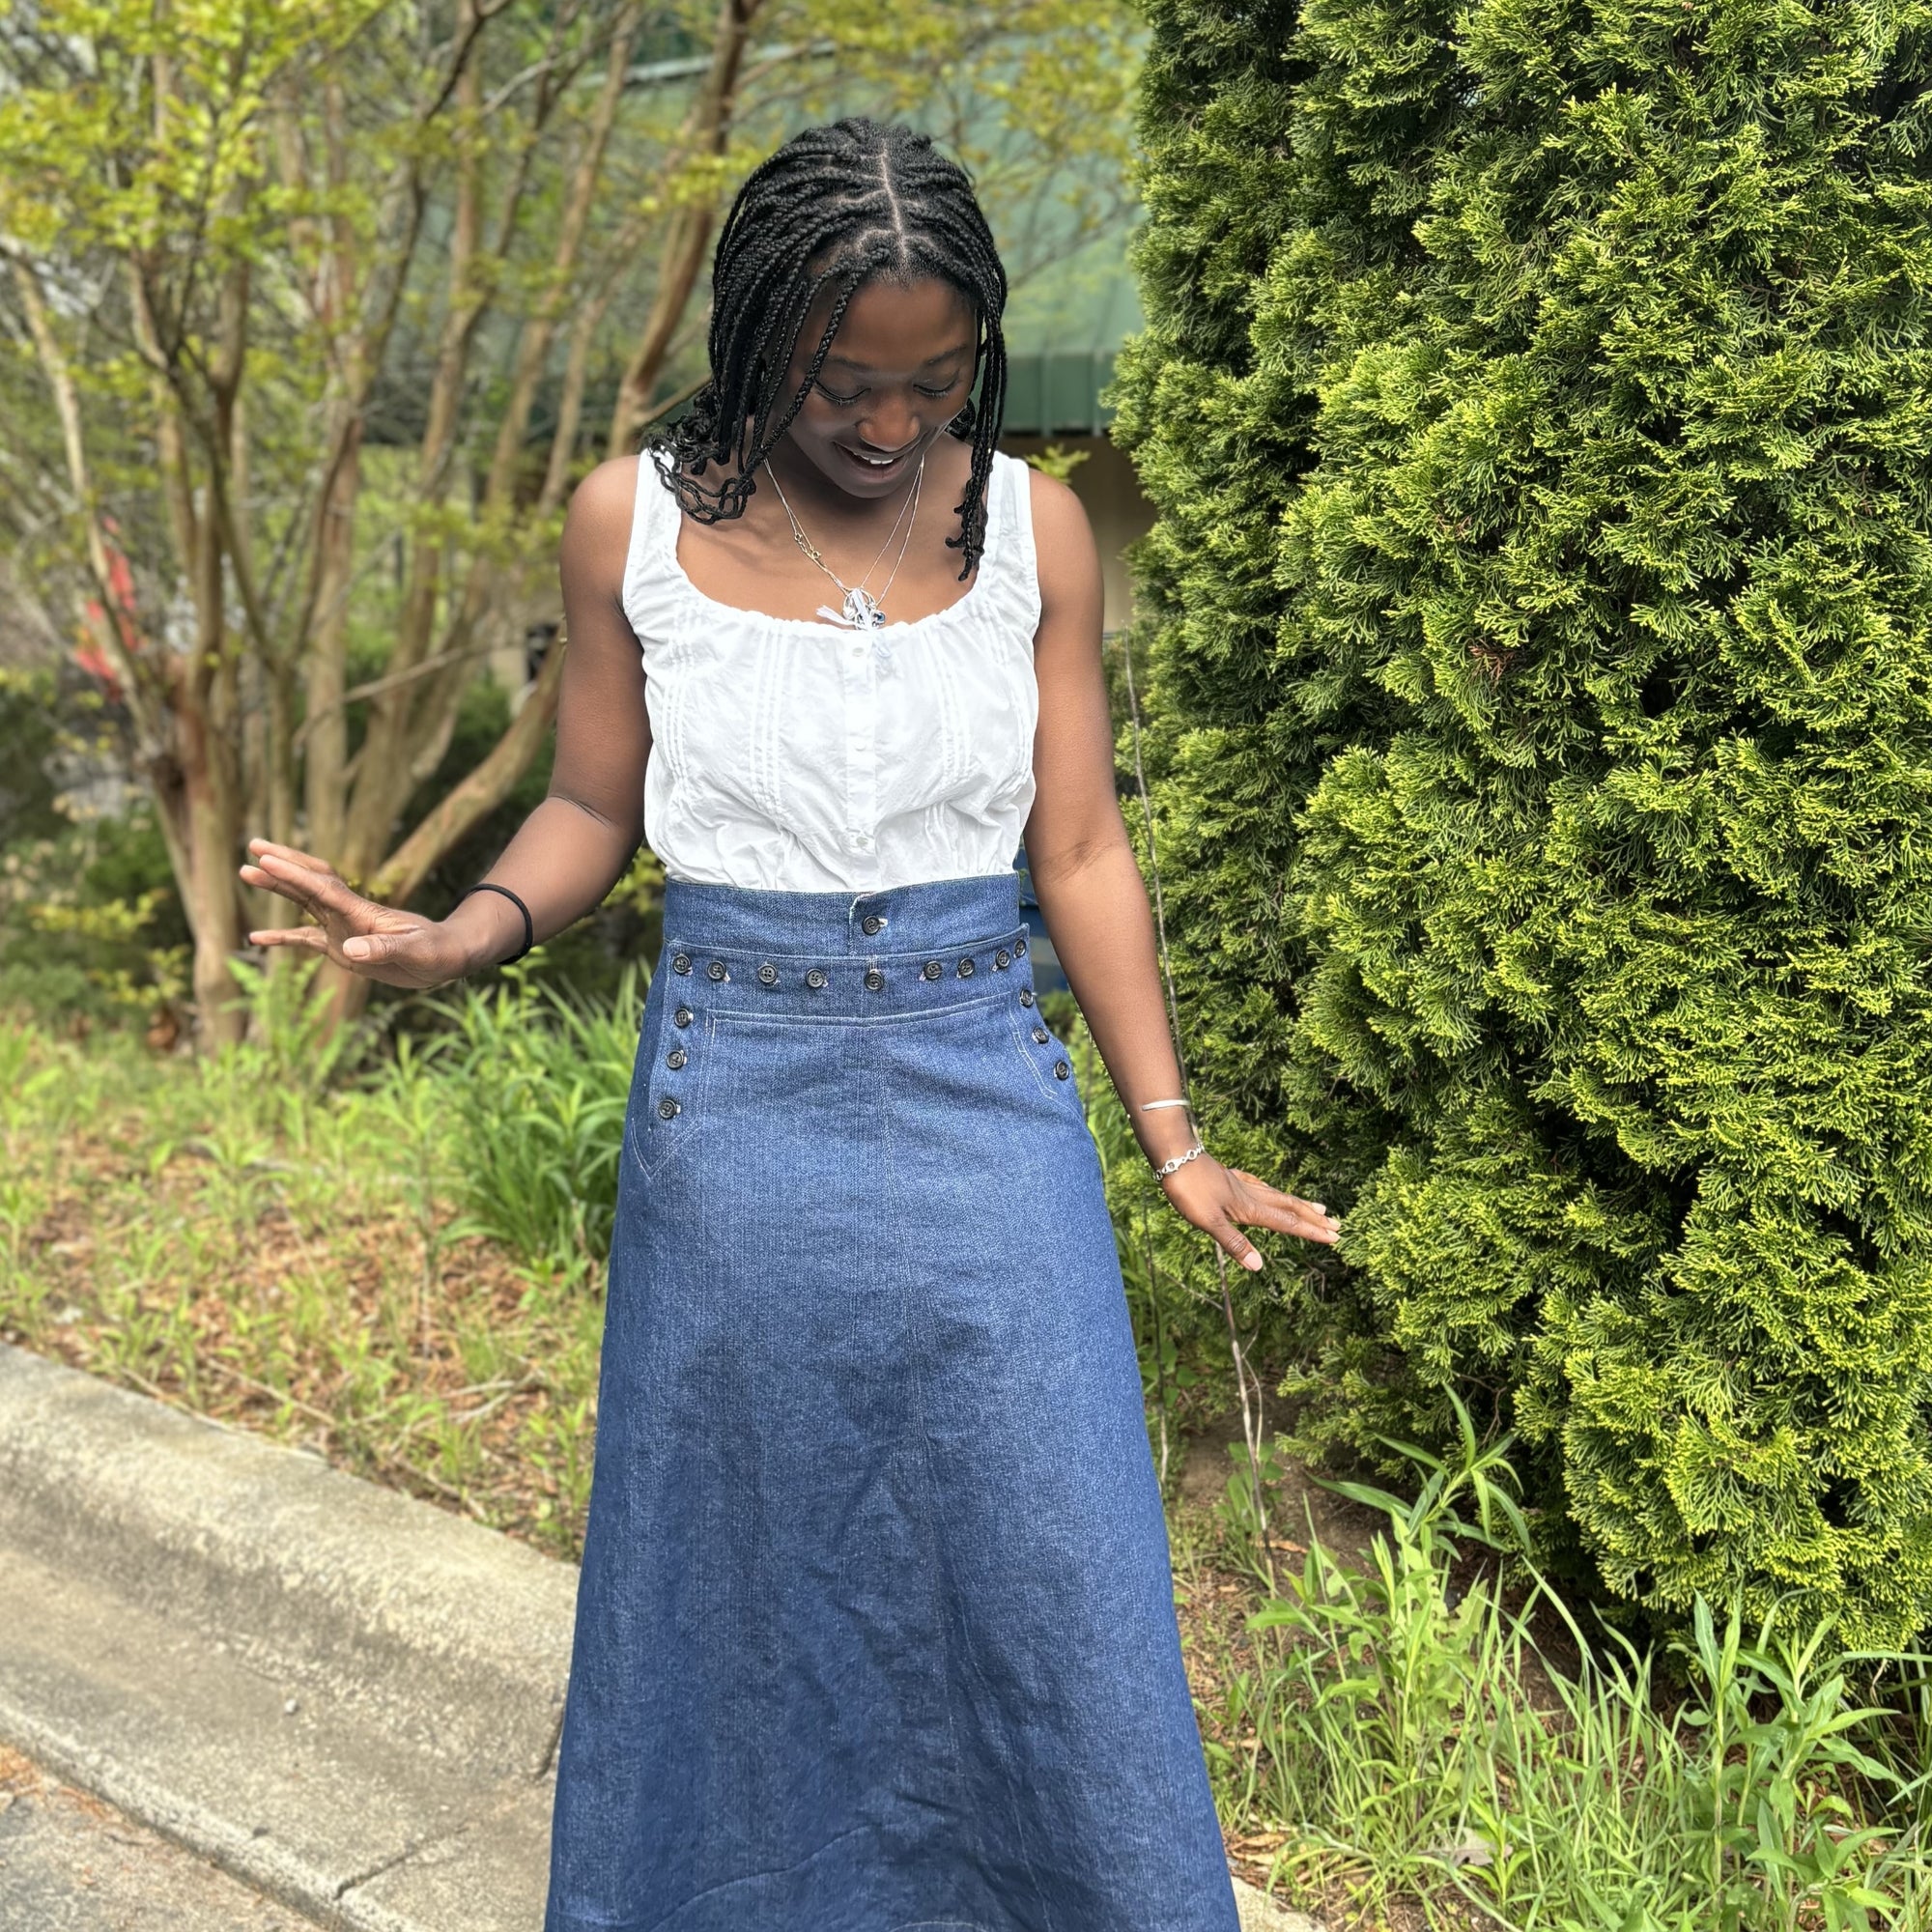 African American woman standing looking down wearing a long denim sailor skirt with a sleeveless white blouse with greenery in the background.